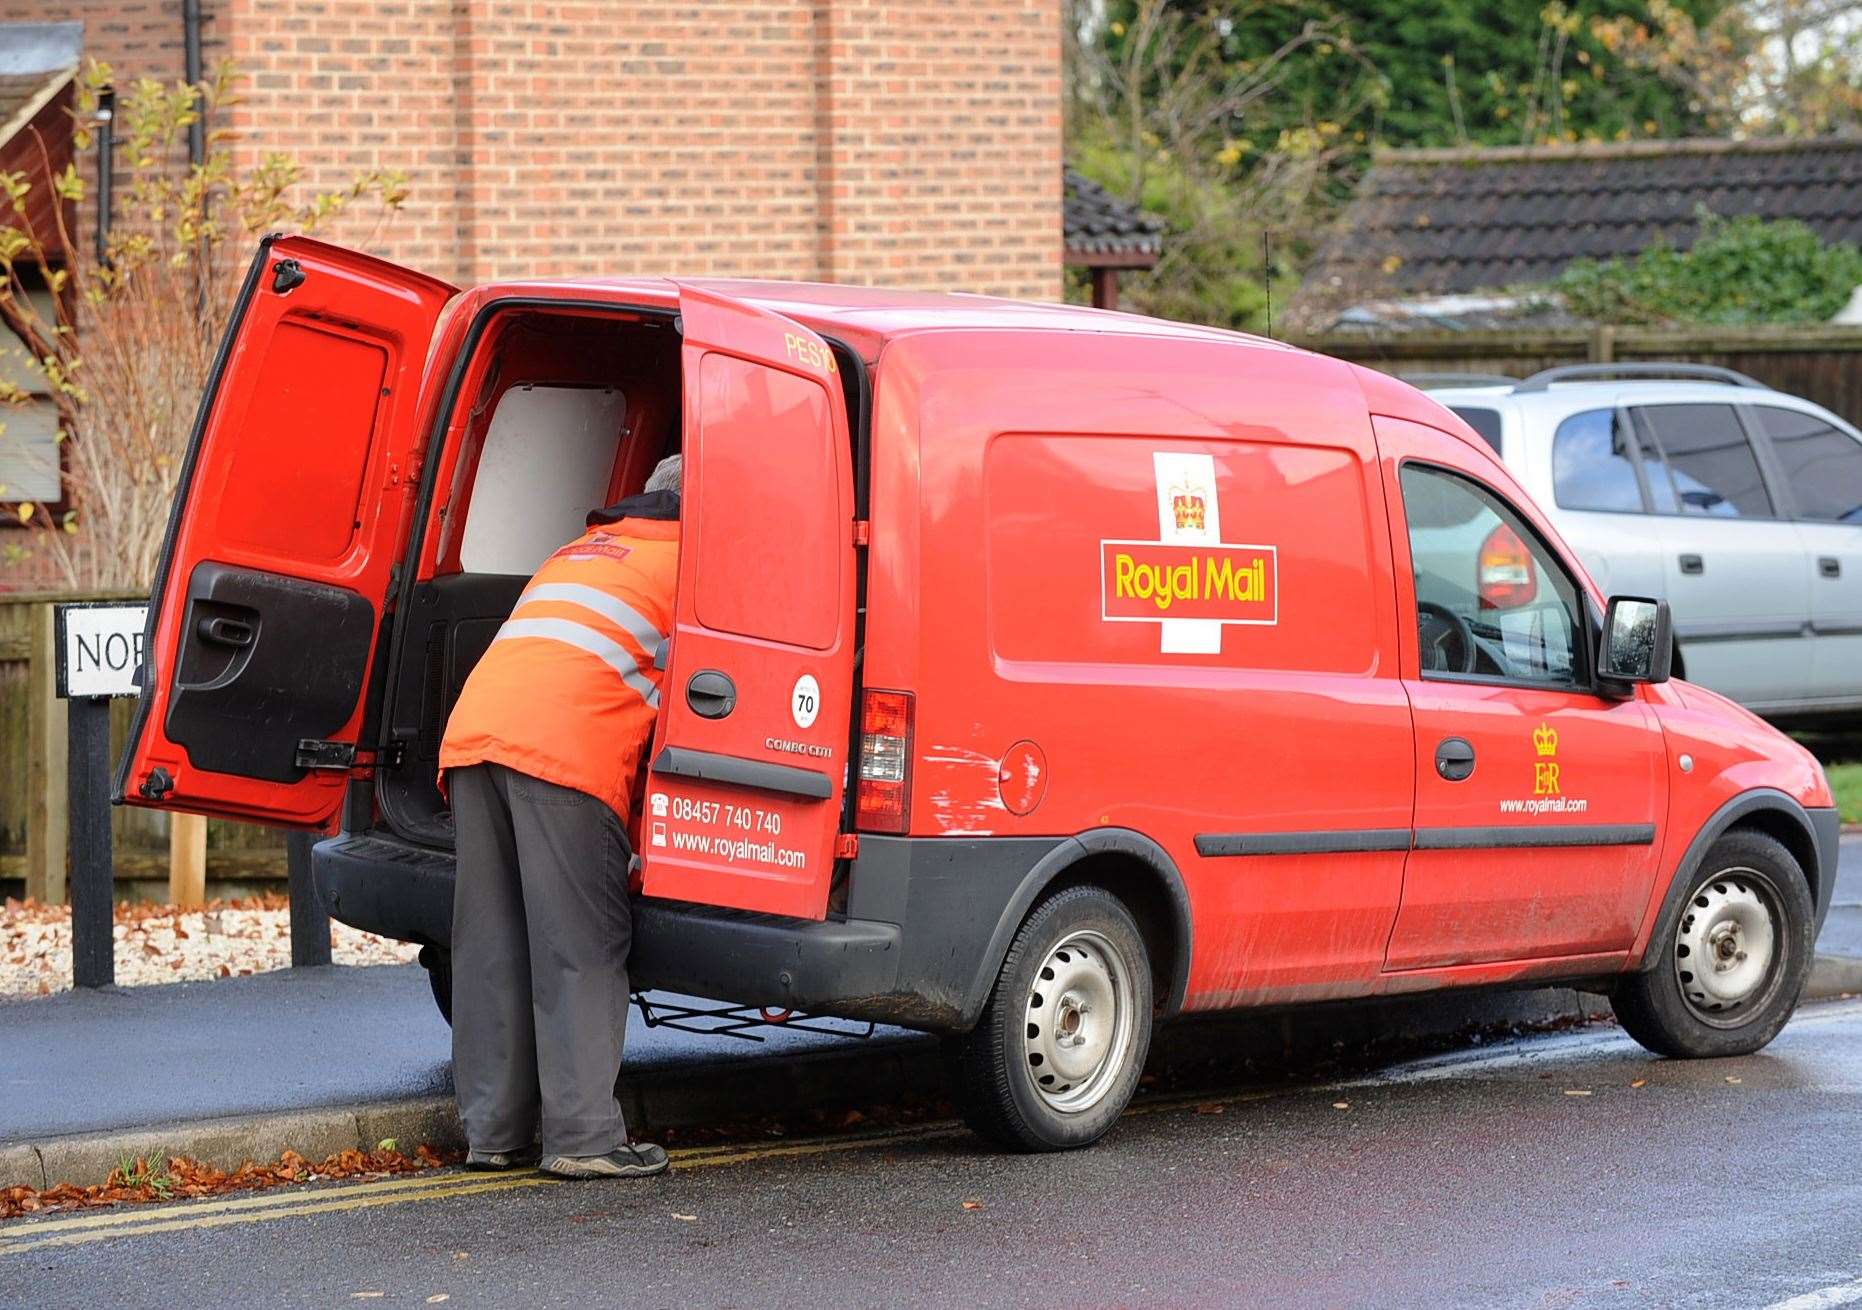 Royal Mail says it is responding to cost pressures